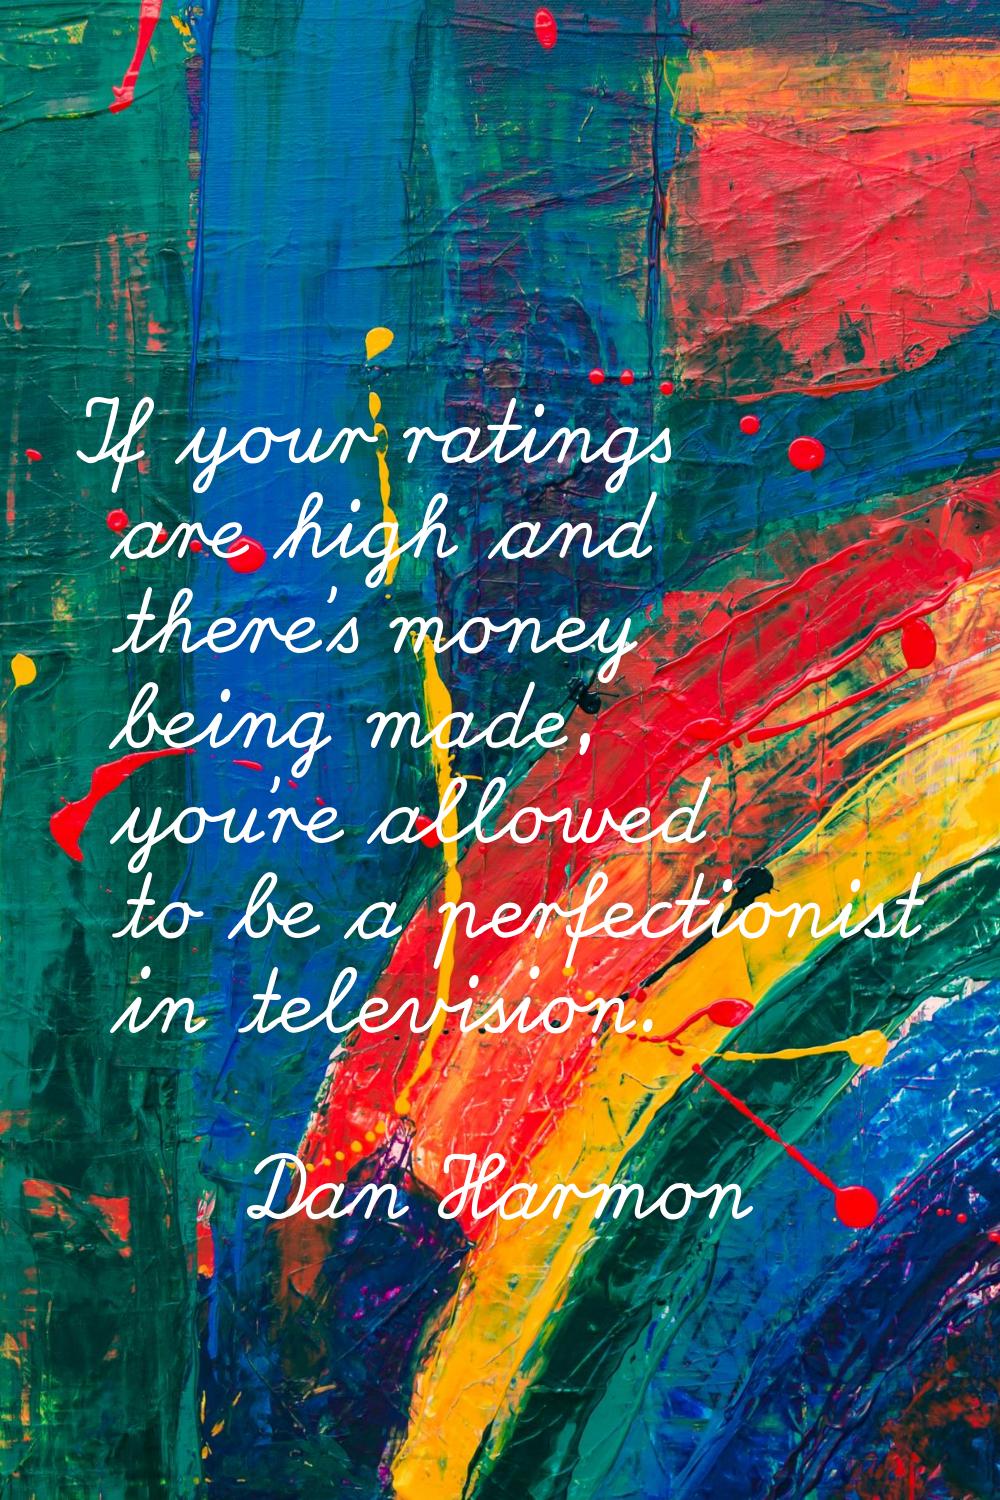 If your ratings are high and there's money being made, you're allowed to be a perfectionist in tele